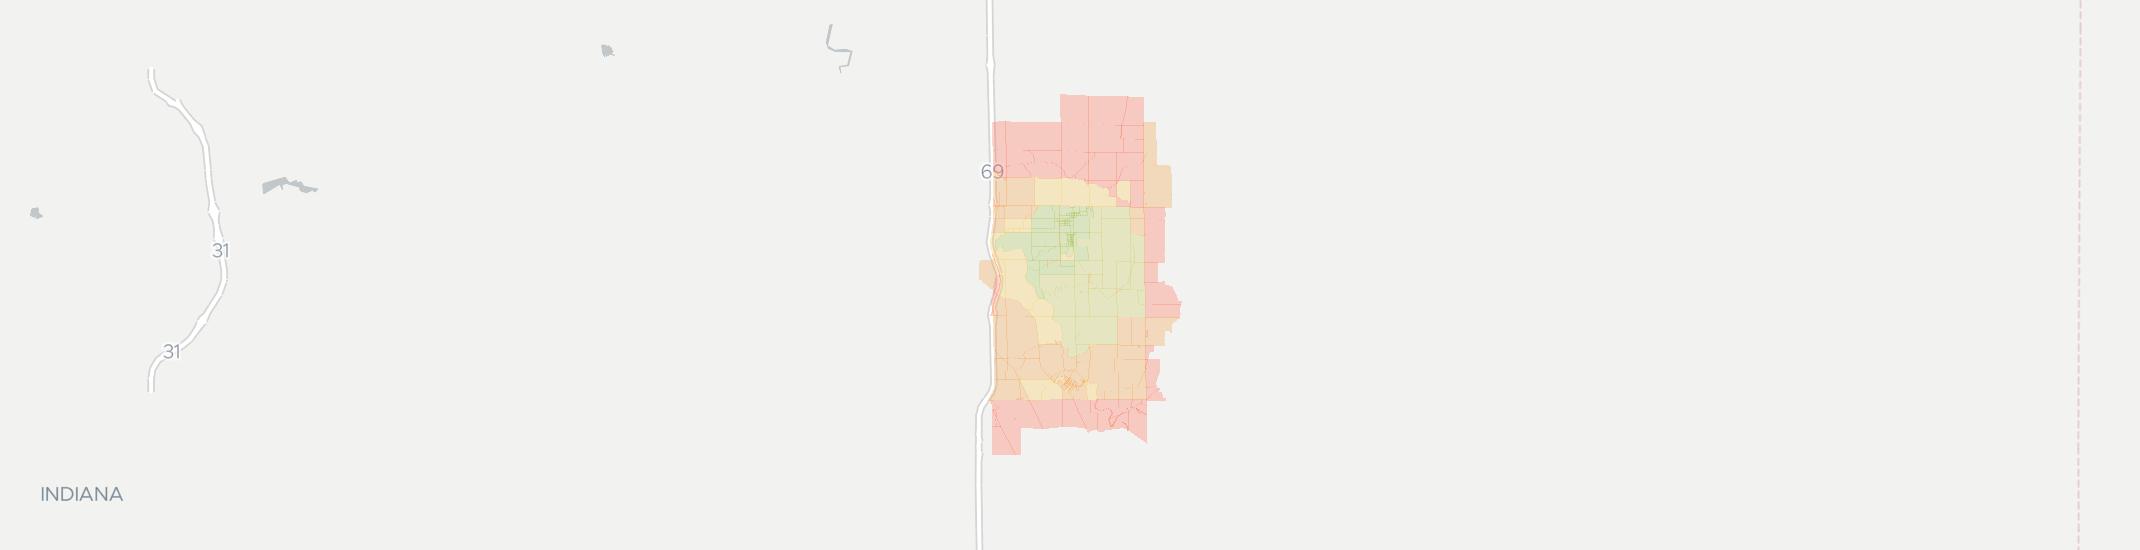 Upland Internet Competition Map. Click for interactive map.